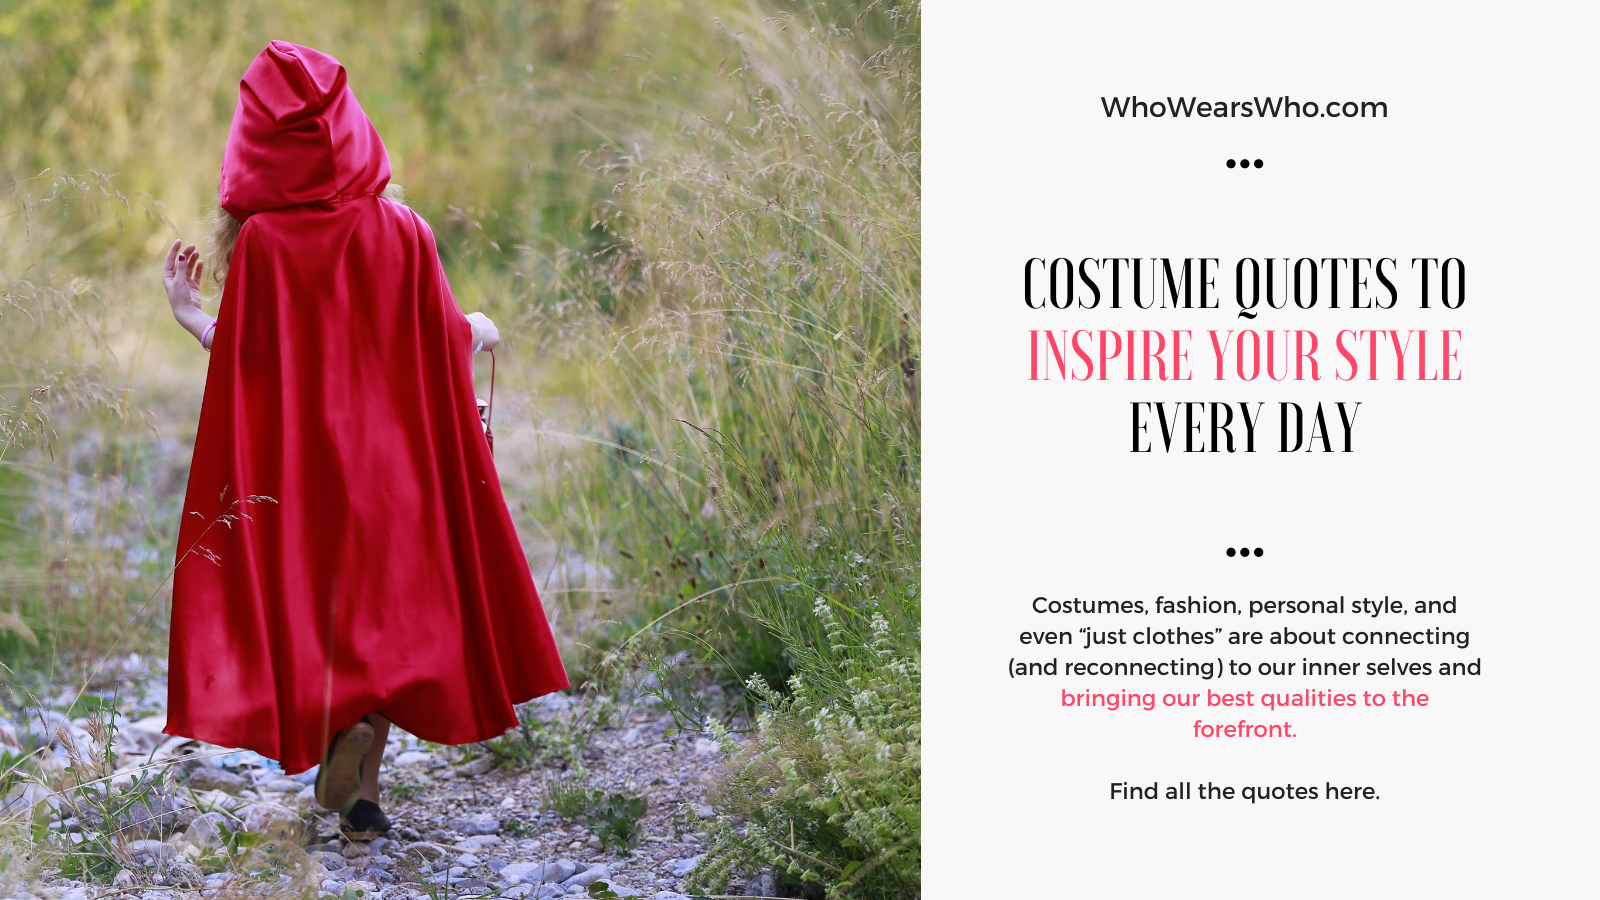 Costume quotes to inspire your style every day Twitter